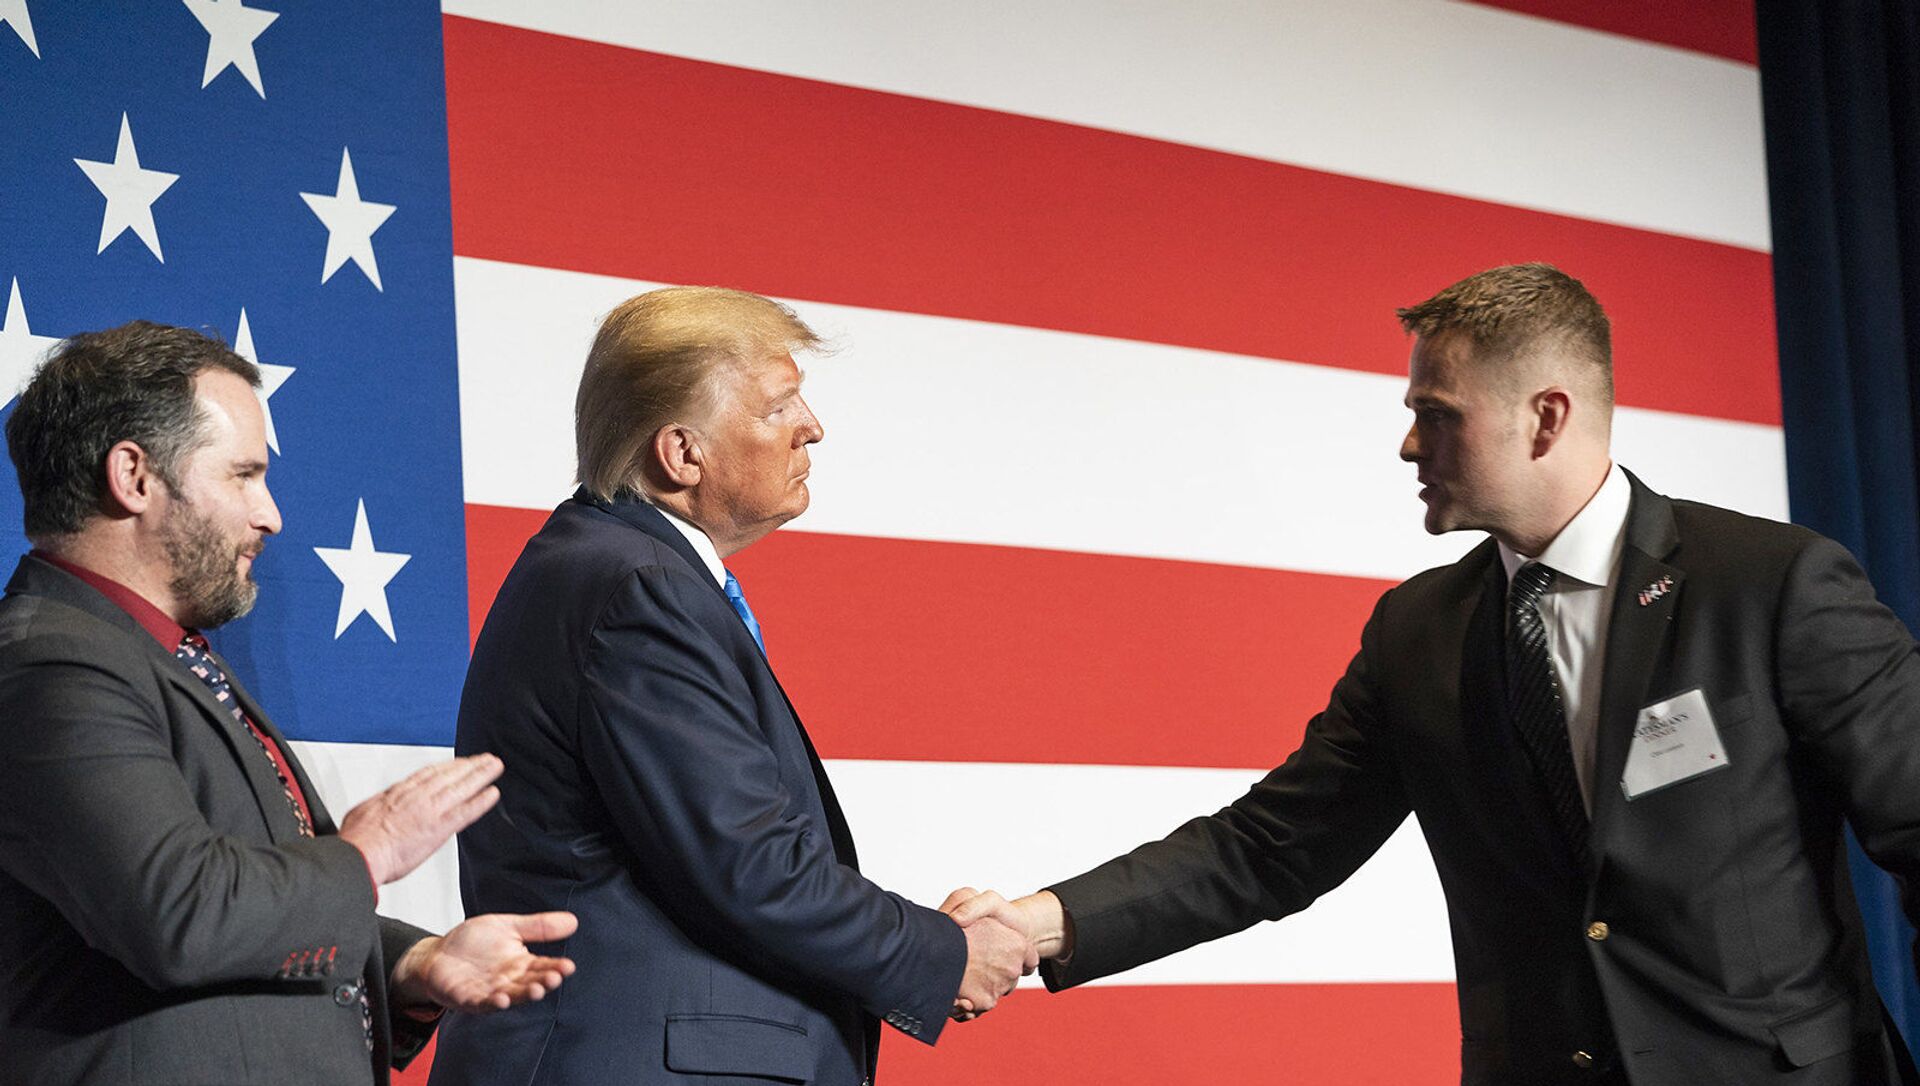 President Donald J. Trump welcomes Army First Lieutenant Clint Lorance and Army Major Mathew Golsteyn to the stage prior to his remarks at the Republican Party of Florida’s Statesman Dinner Saturday, Dec. 7, 2019, in Aventura, Fla. Both soldiers were recently granted full pardons by President Trump on November 15th, 2019. (Official White House Photo by Joyce N. Boghosian) - Sputnik International, 1920, 18.03.2021